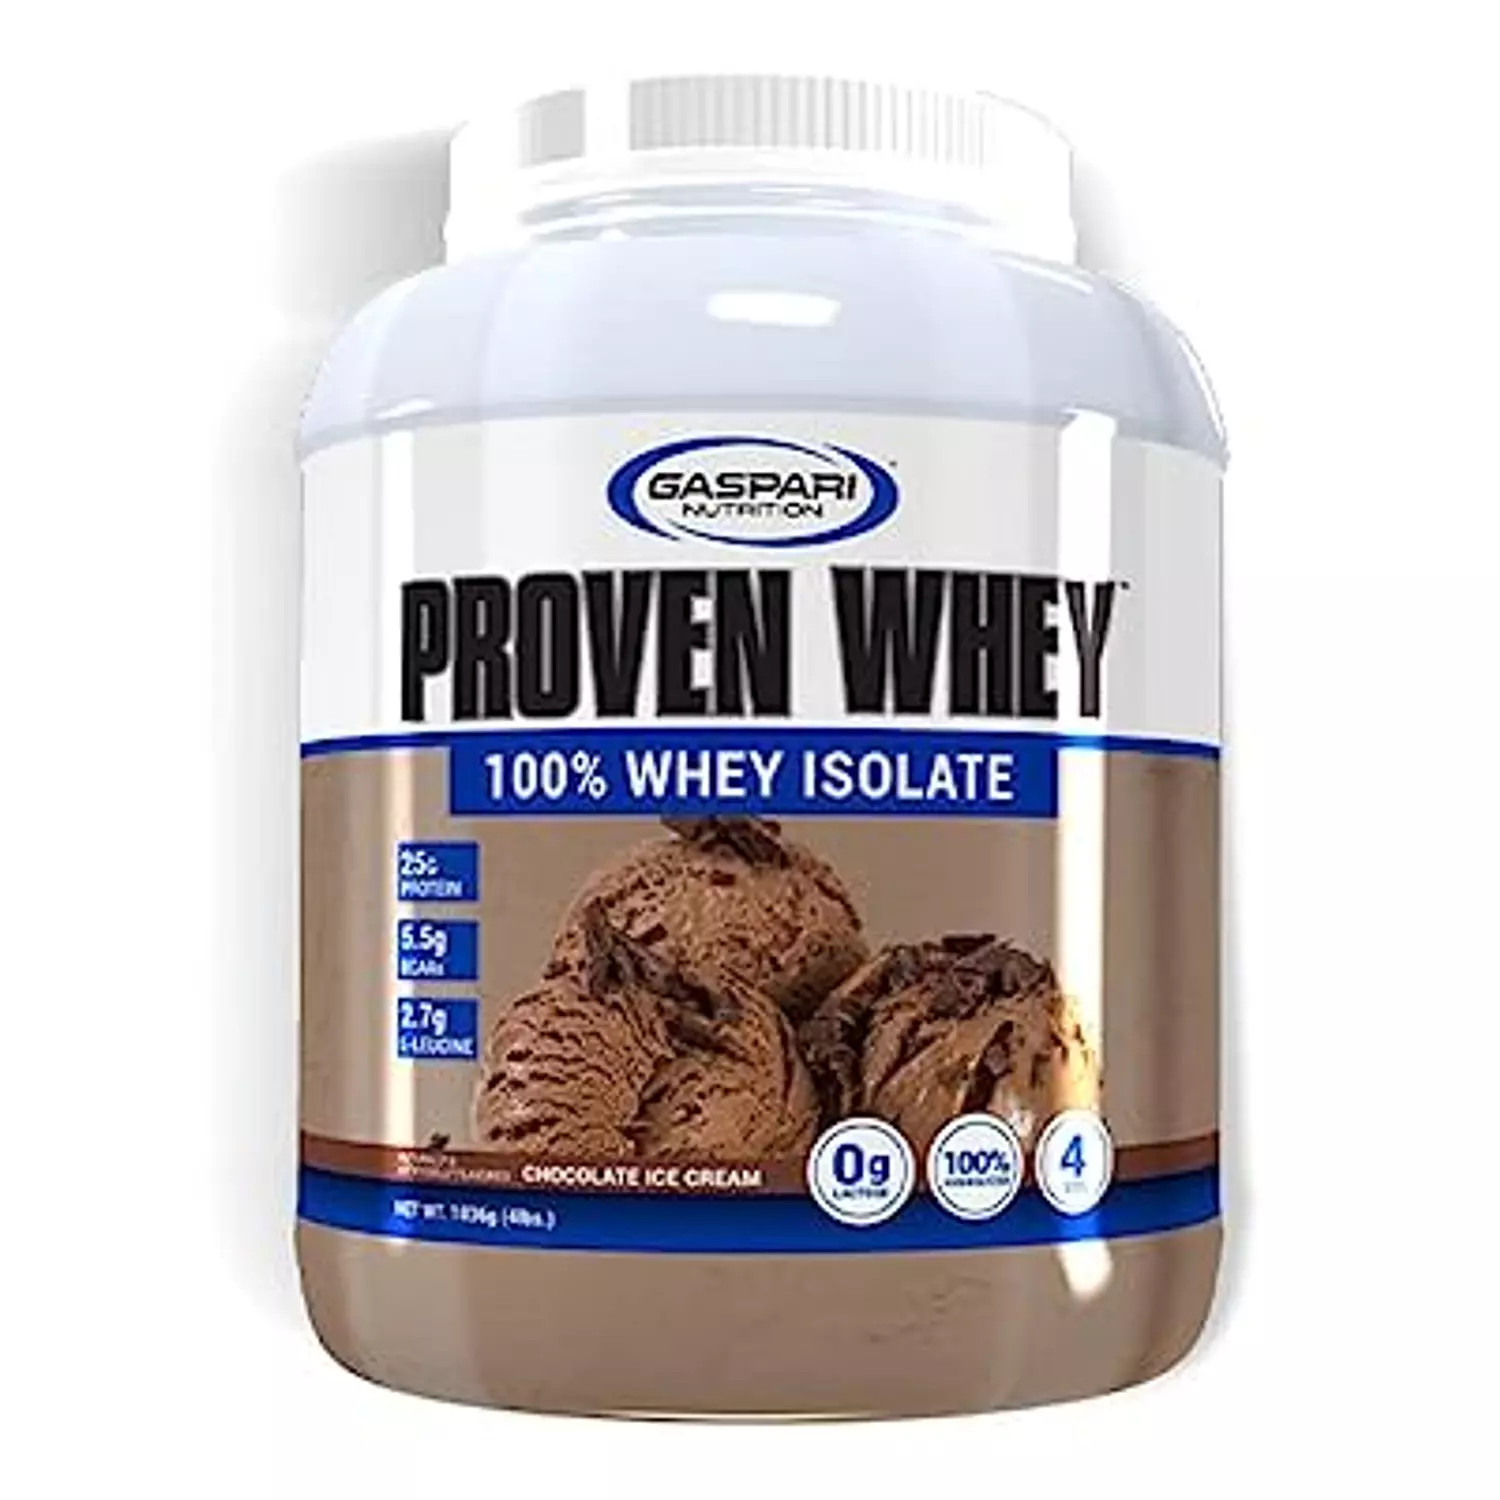 Proven whey hover image